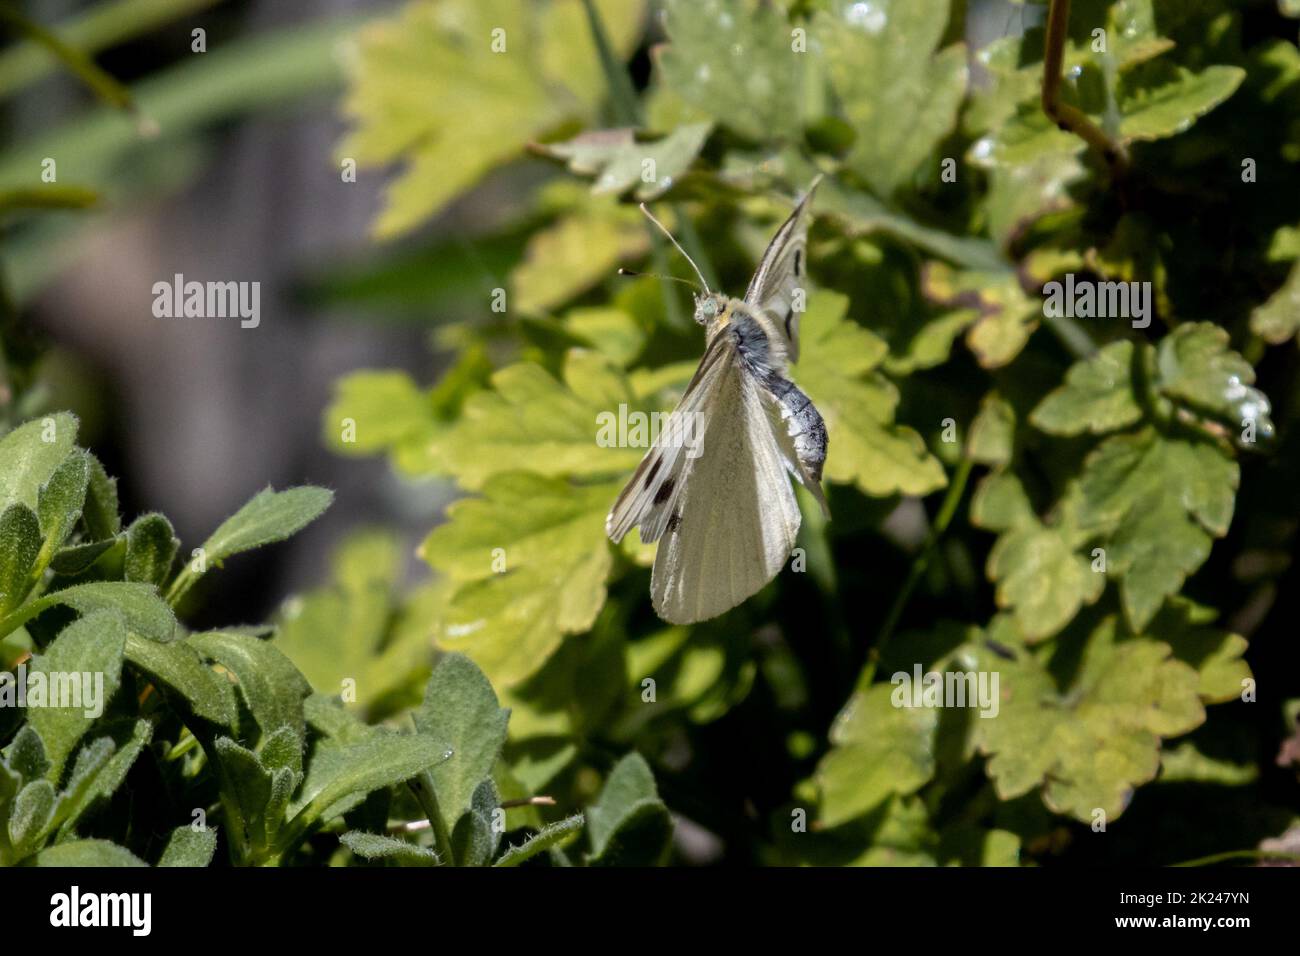 Small White butterfly (Pieris rapae) flying over red busy lizzie flowers in a garden, UK wildlife Stock Photo